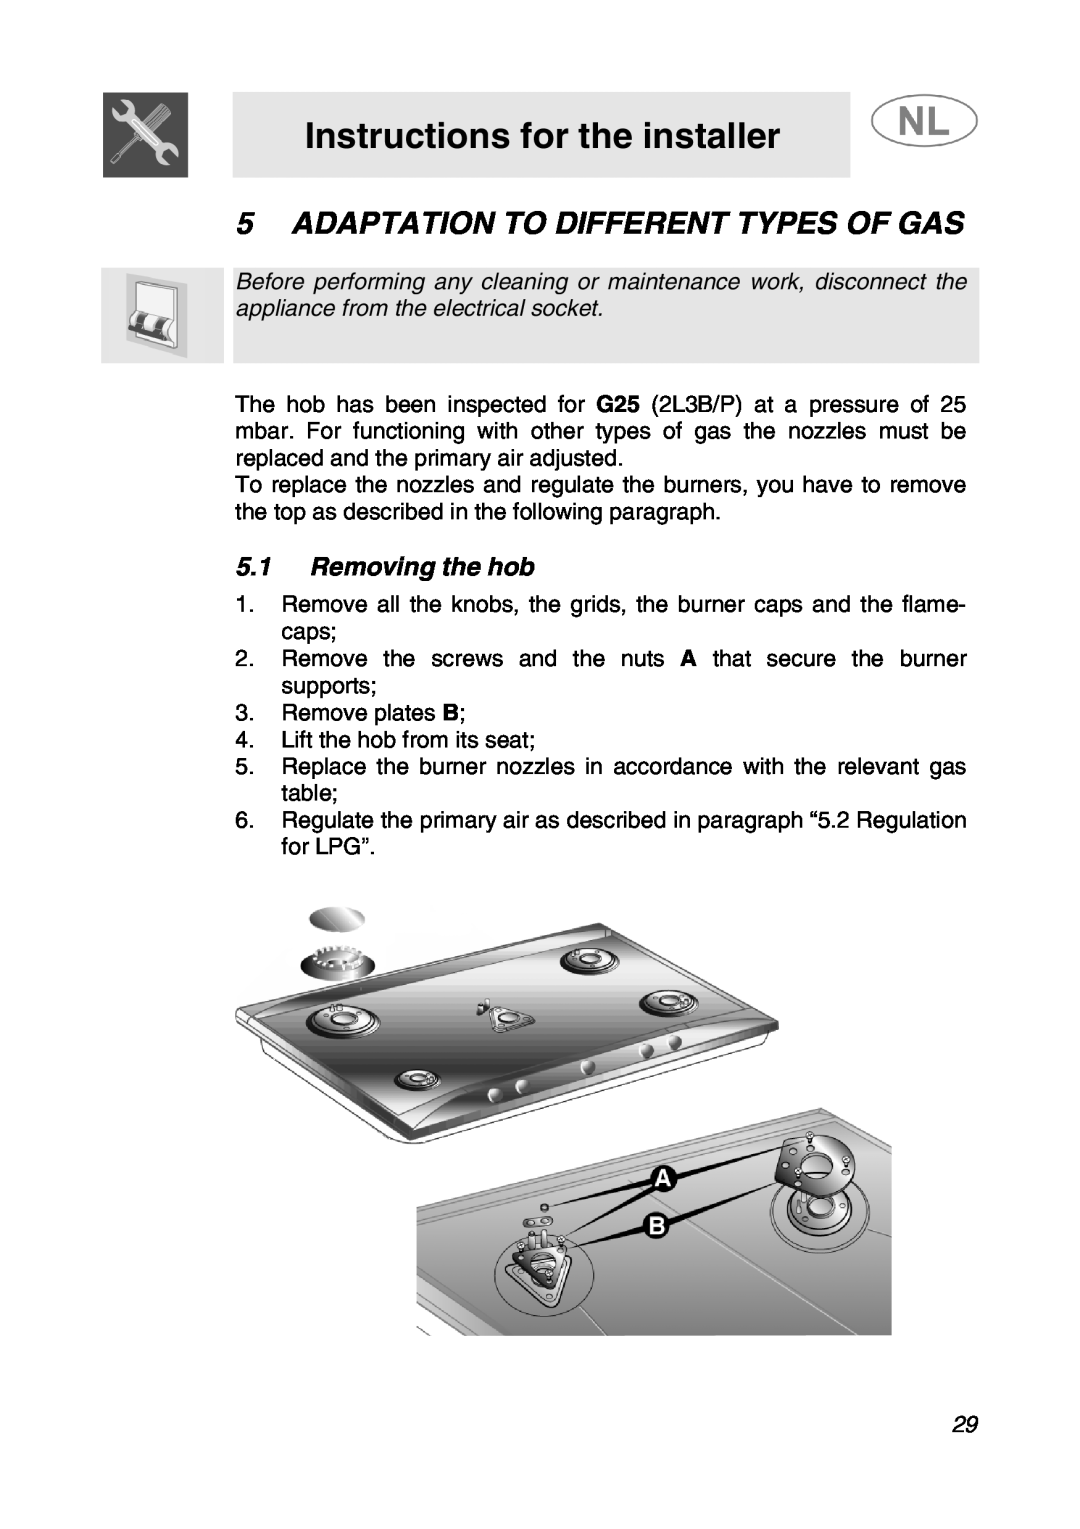 Smeg SNL574GH manual Adaptation To Different Types Of Gas, Removing the hob, Instructions for the installer 